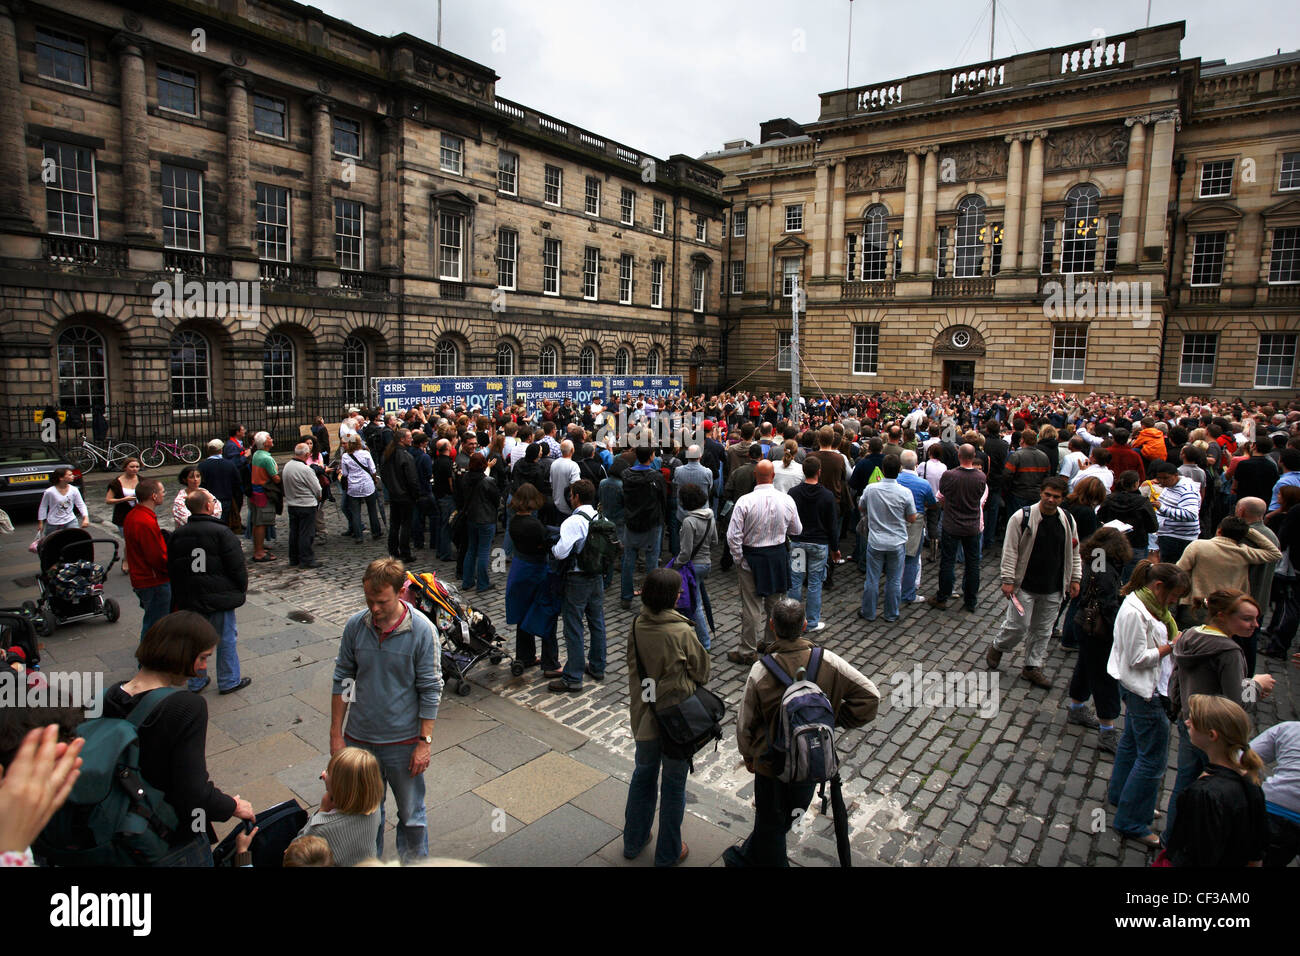 Spectators in The Royal Mile in the Old Town of Edinburgh during the Fringe Festival. Stock Photo